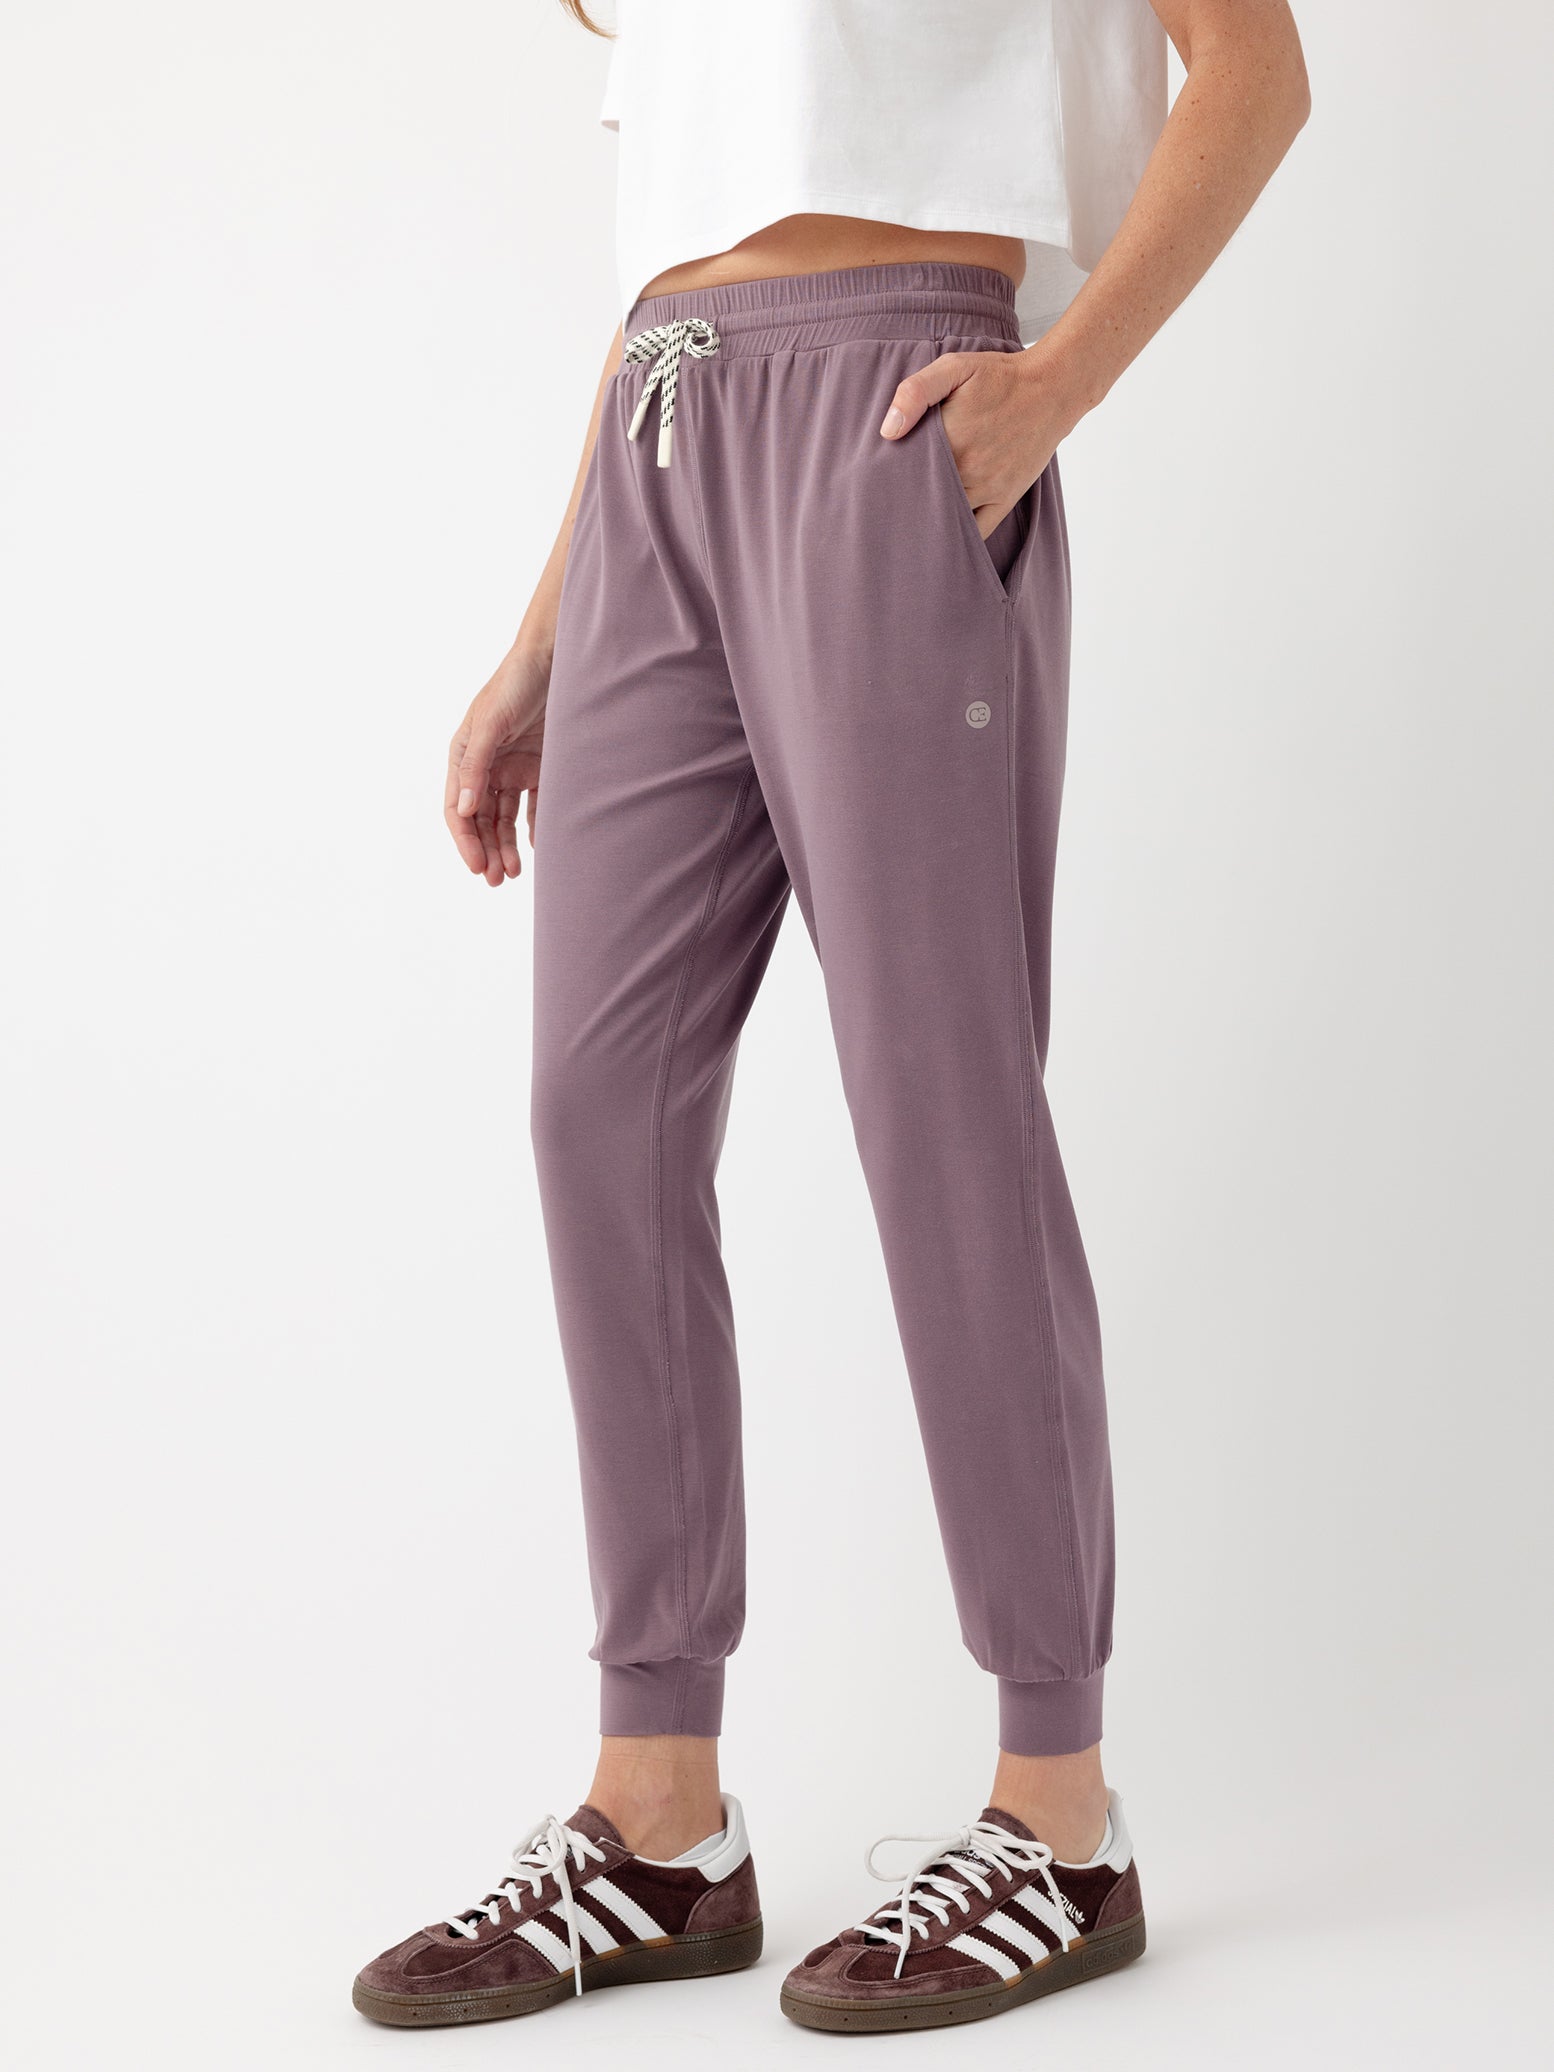 Twilight Studio Jogger. The Studio Joggers are worn by a woman photographed with a white background. |Color:Twilight